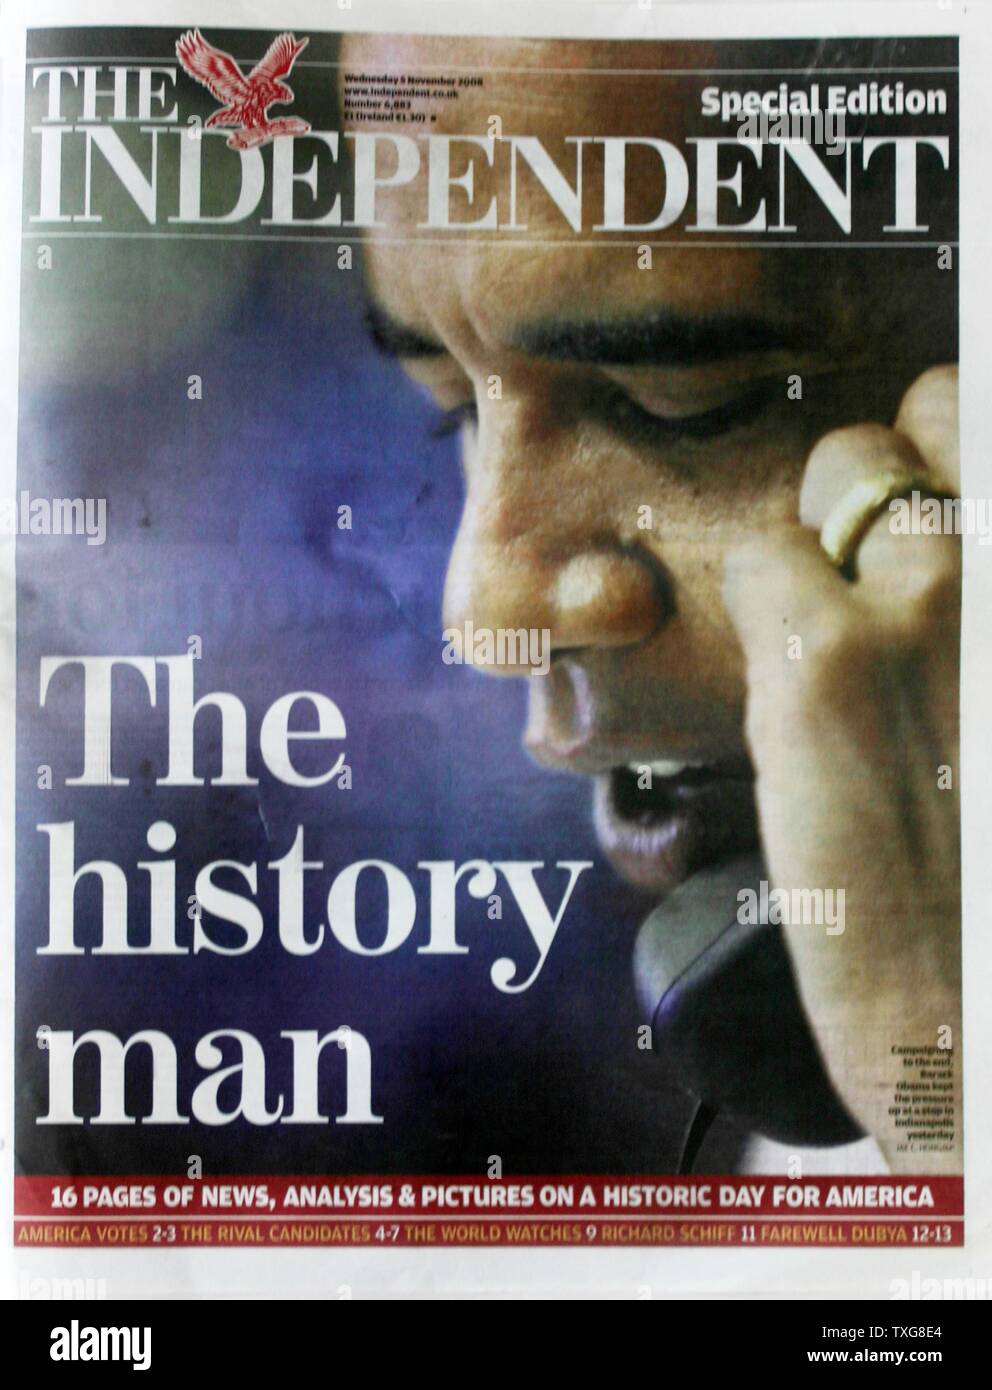 Front page of the ''The Independent' newspaper 5th November 2008. Mainly about the election of Barak Obama as United States President 'The history man' Stock Photo